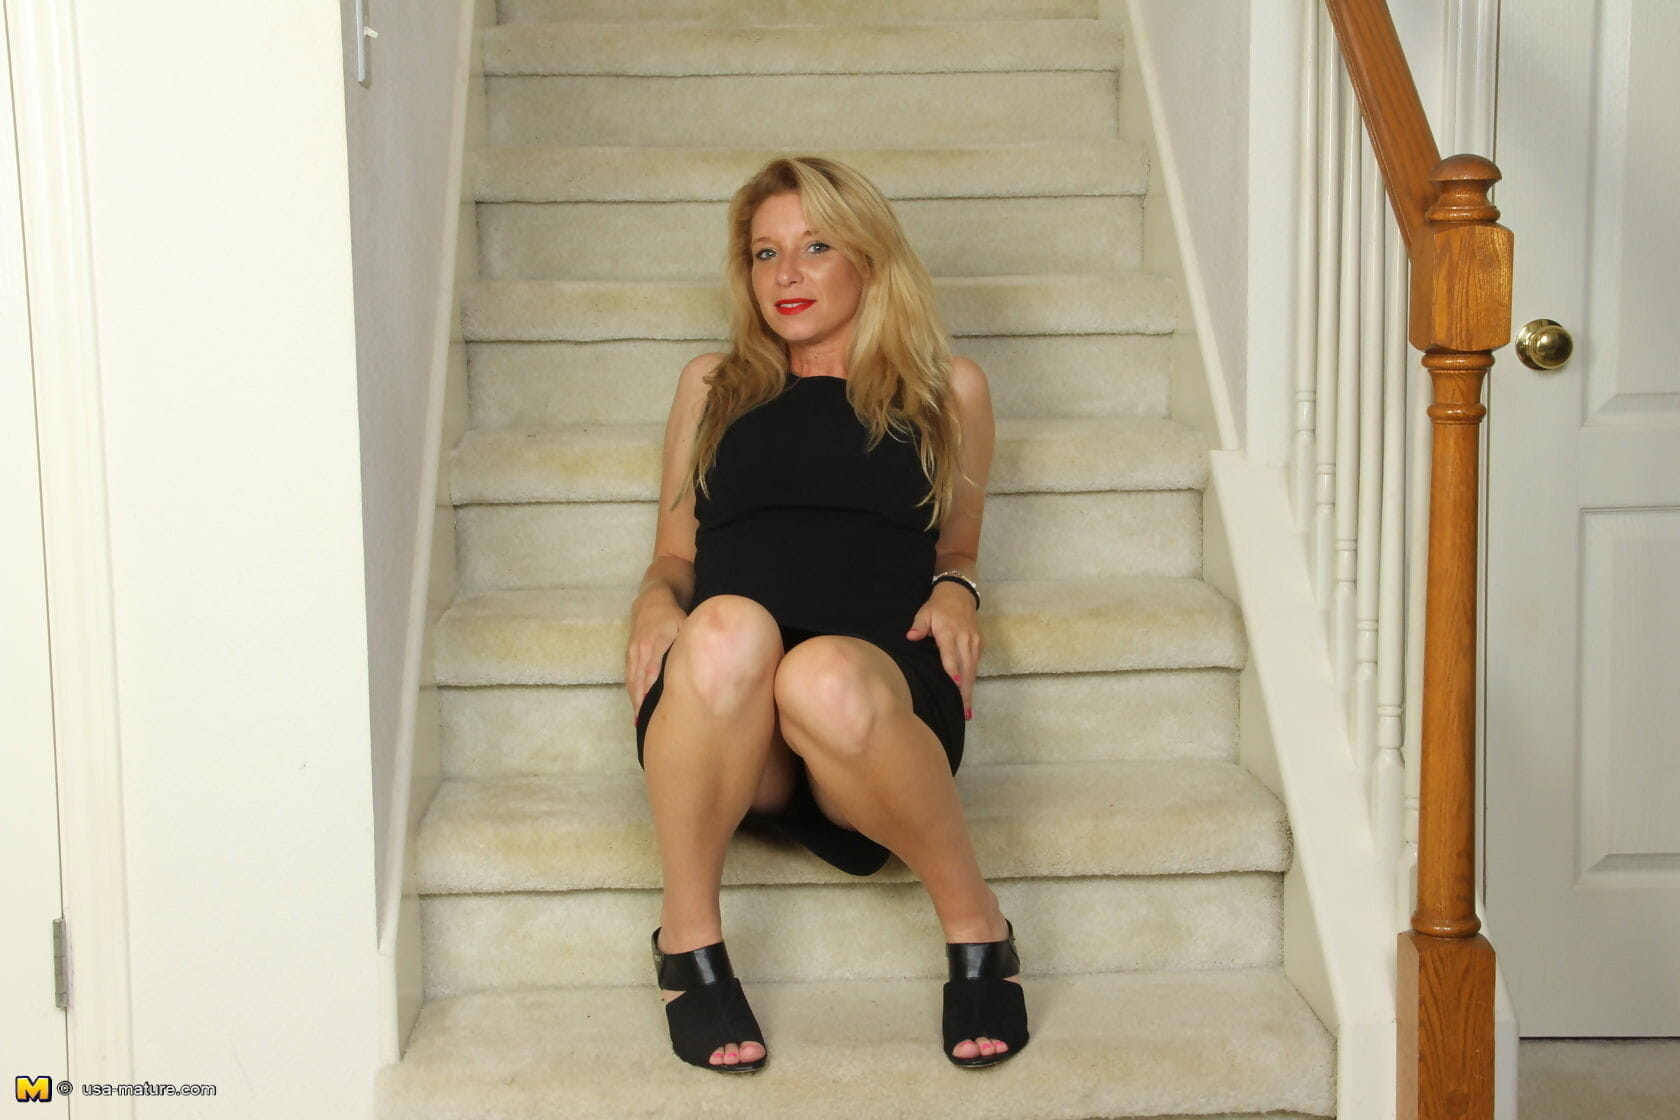 Steamy american milf felicia playing on the stairway - part 2341 page 1